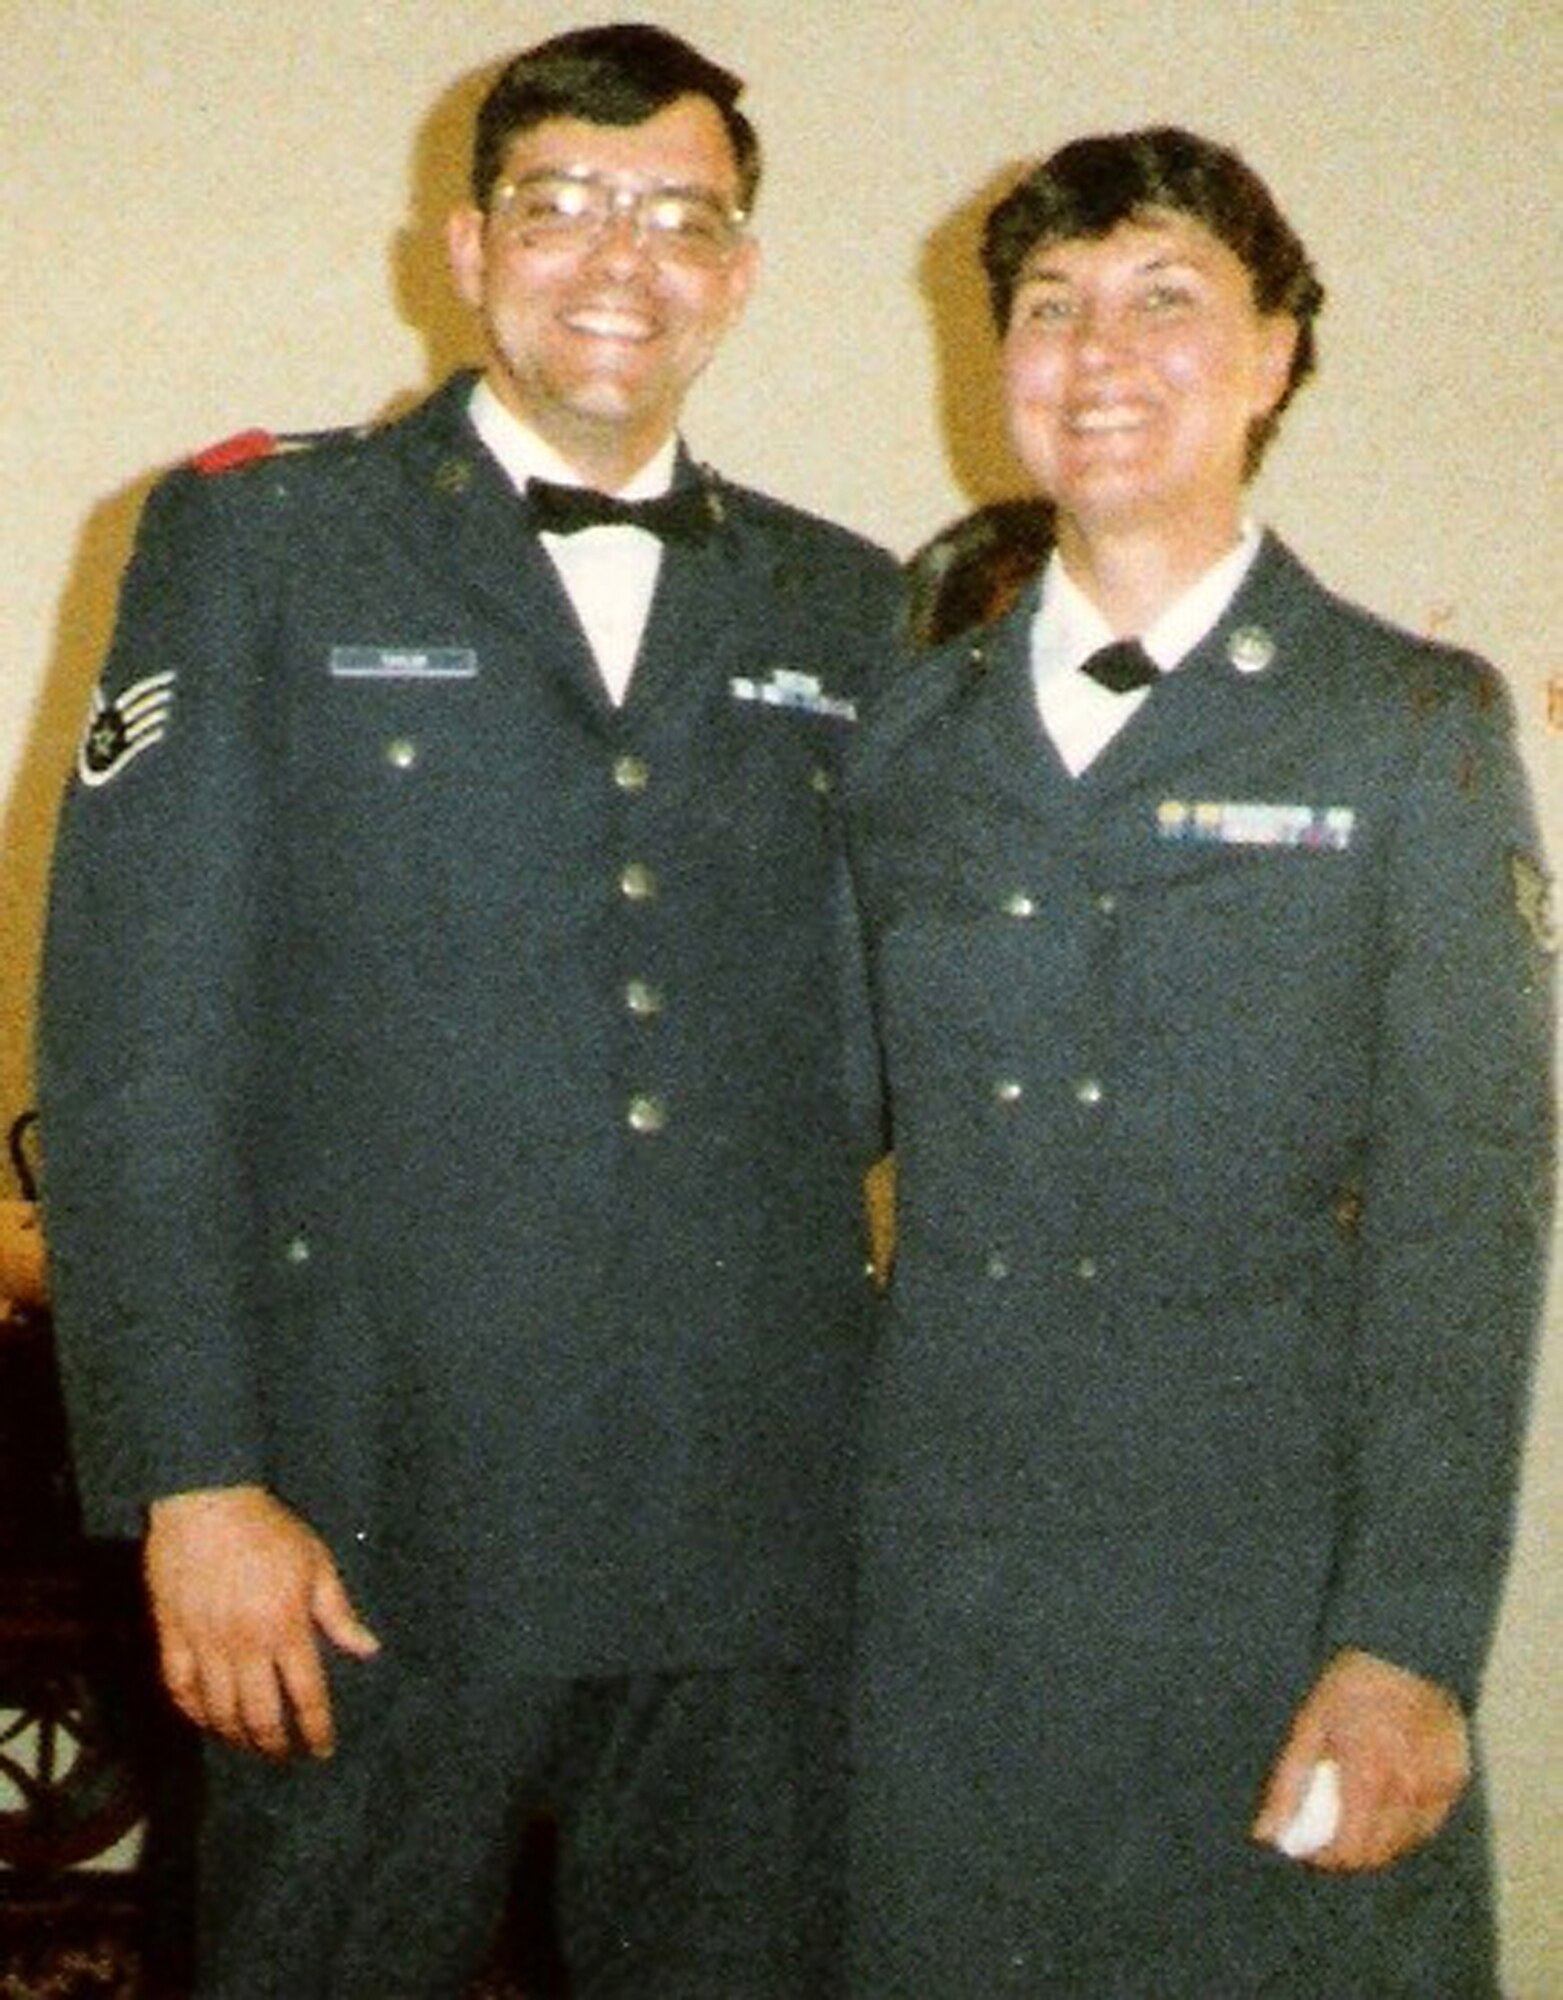 YOUNGSTOWN AIR RESERVE STATION, Ohio — Then Staff Sgt. Fran Taylor with her husband Staff Sgt. John Taylor, a distinguished graduate from NCO Leadership School at what was then Grissom Air Force Base, Ind. while it was still an active duty installation. U.S. Air Force/Courtesy Photo.